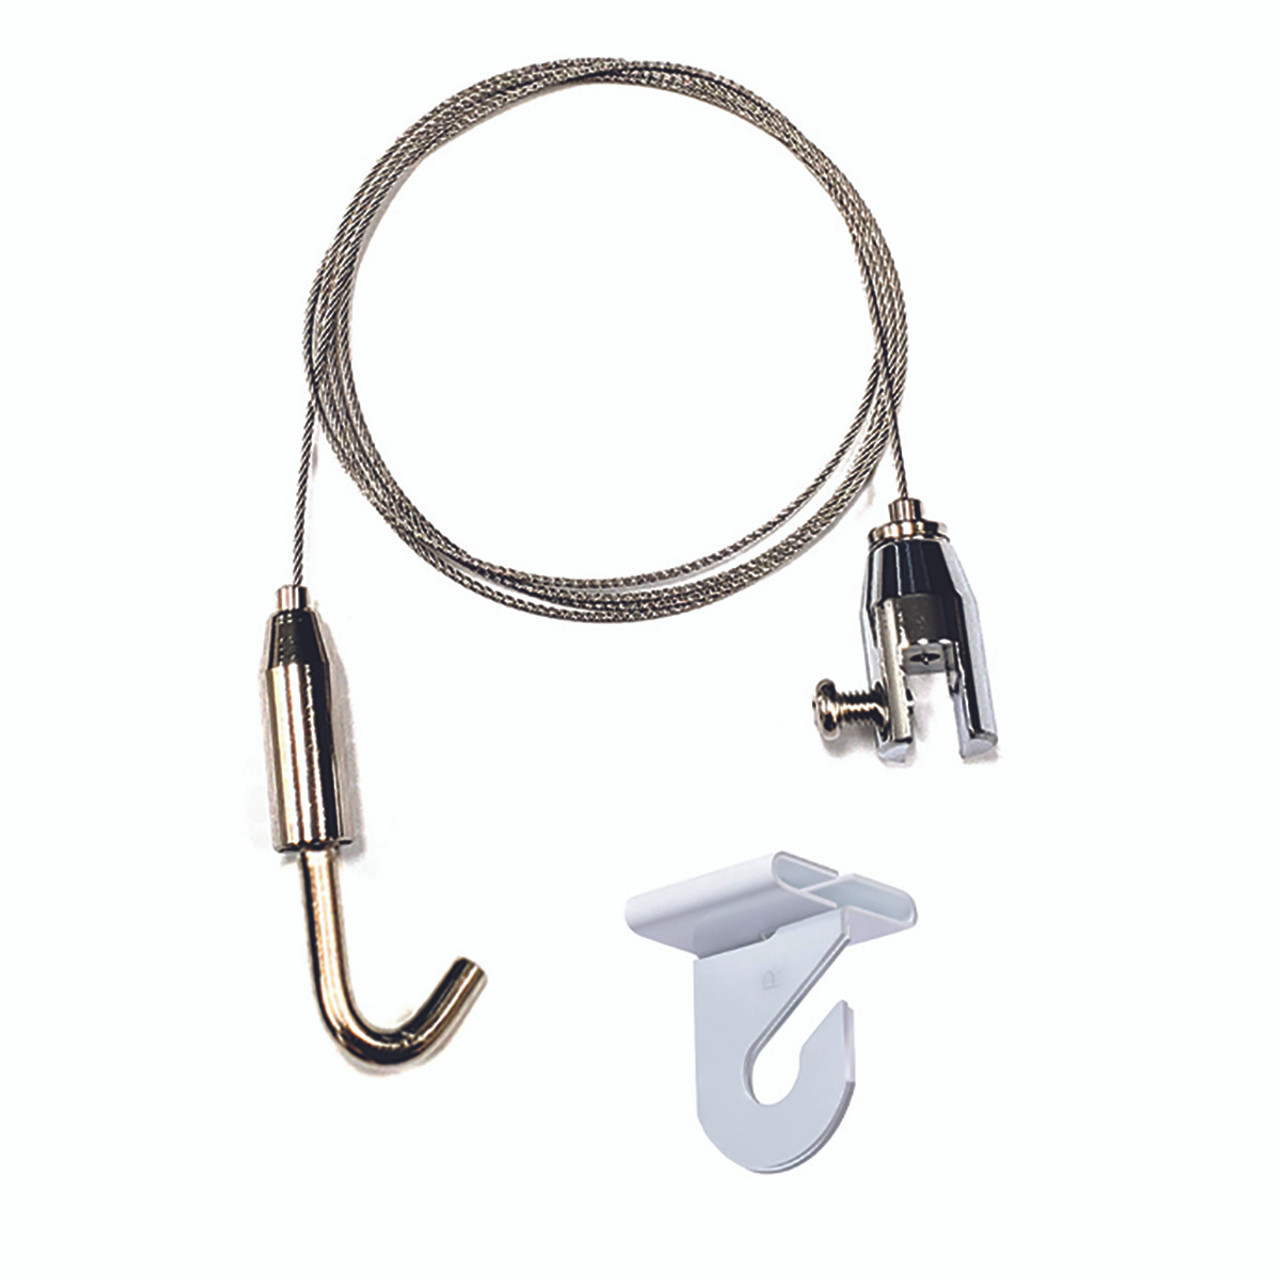 Ceiling Suspended Cable Kit w/ Slide Clamp